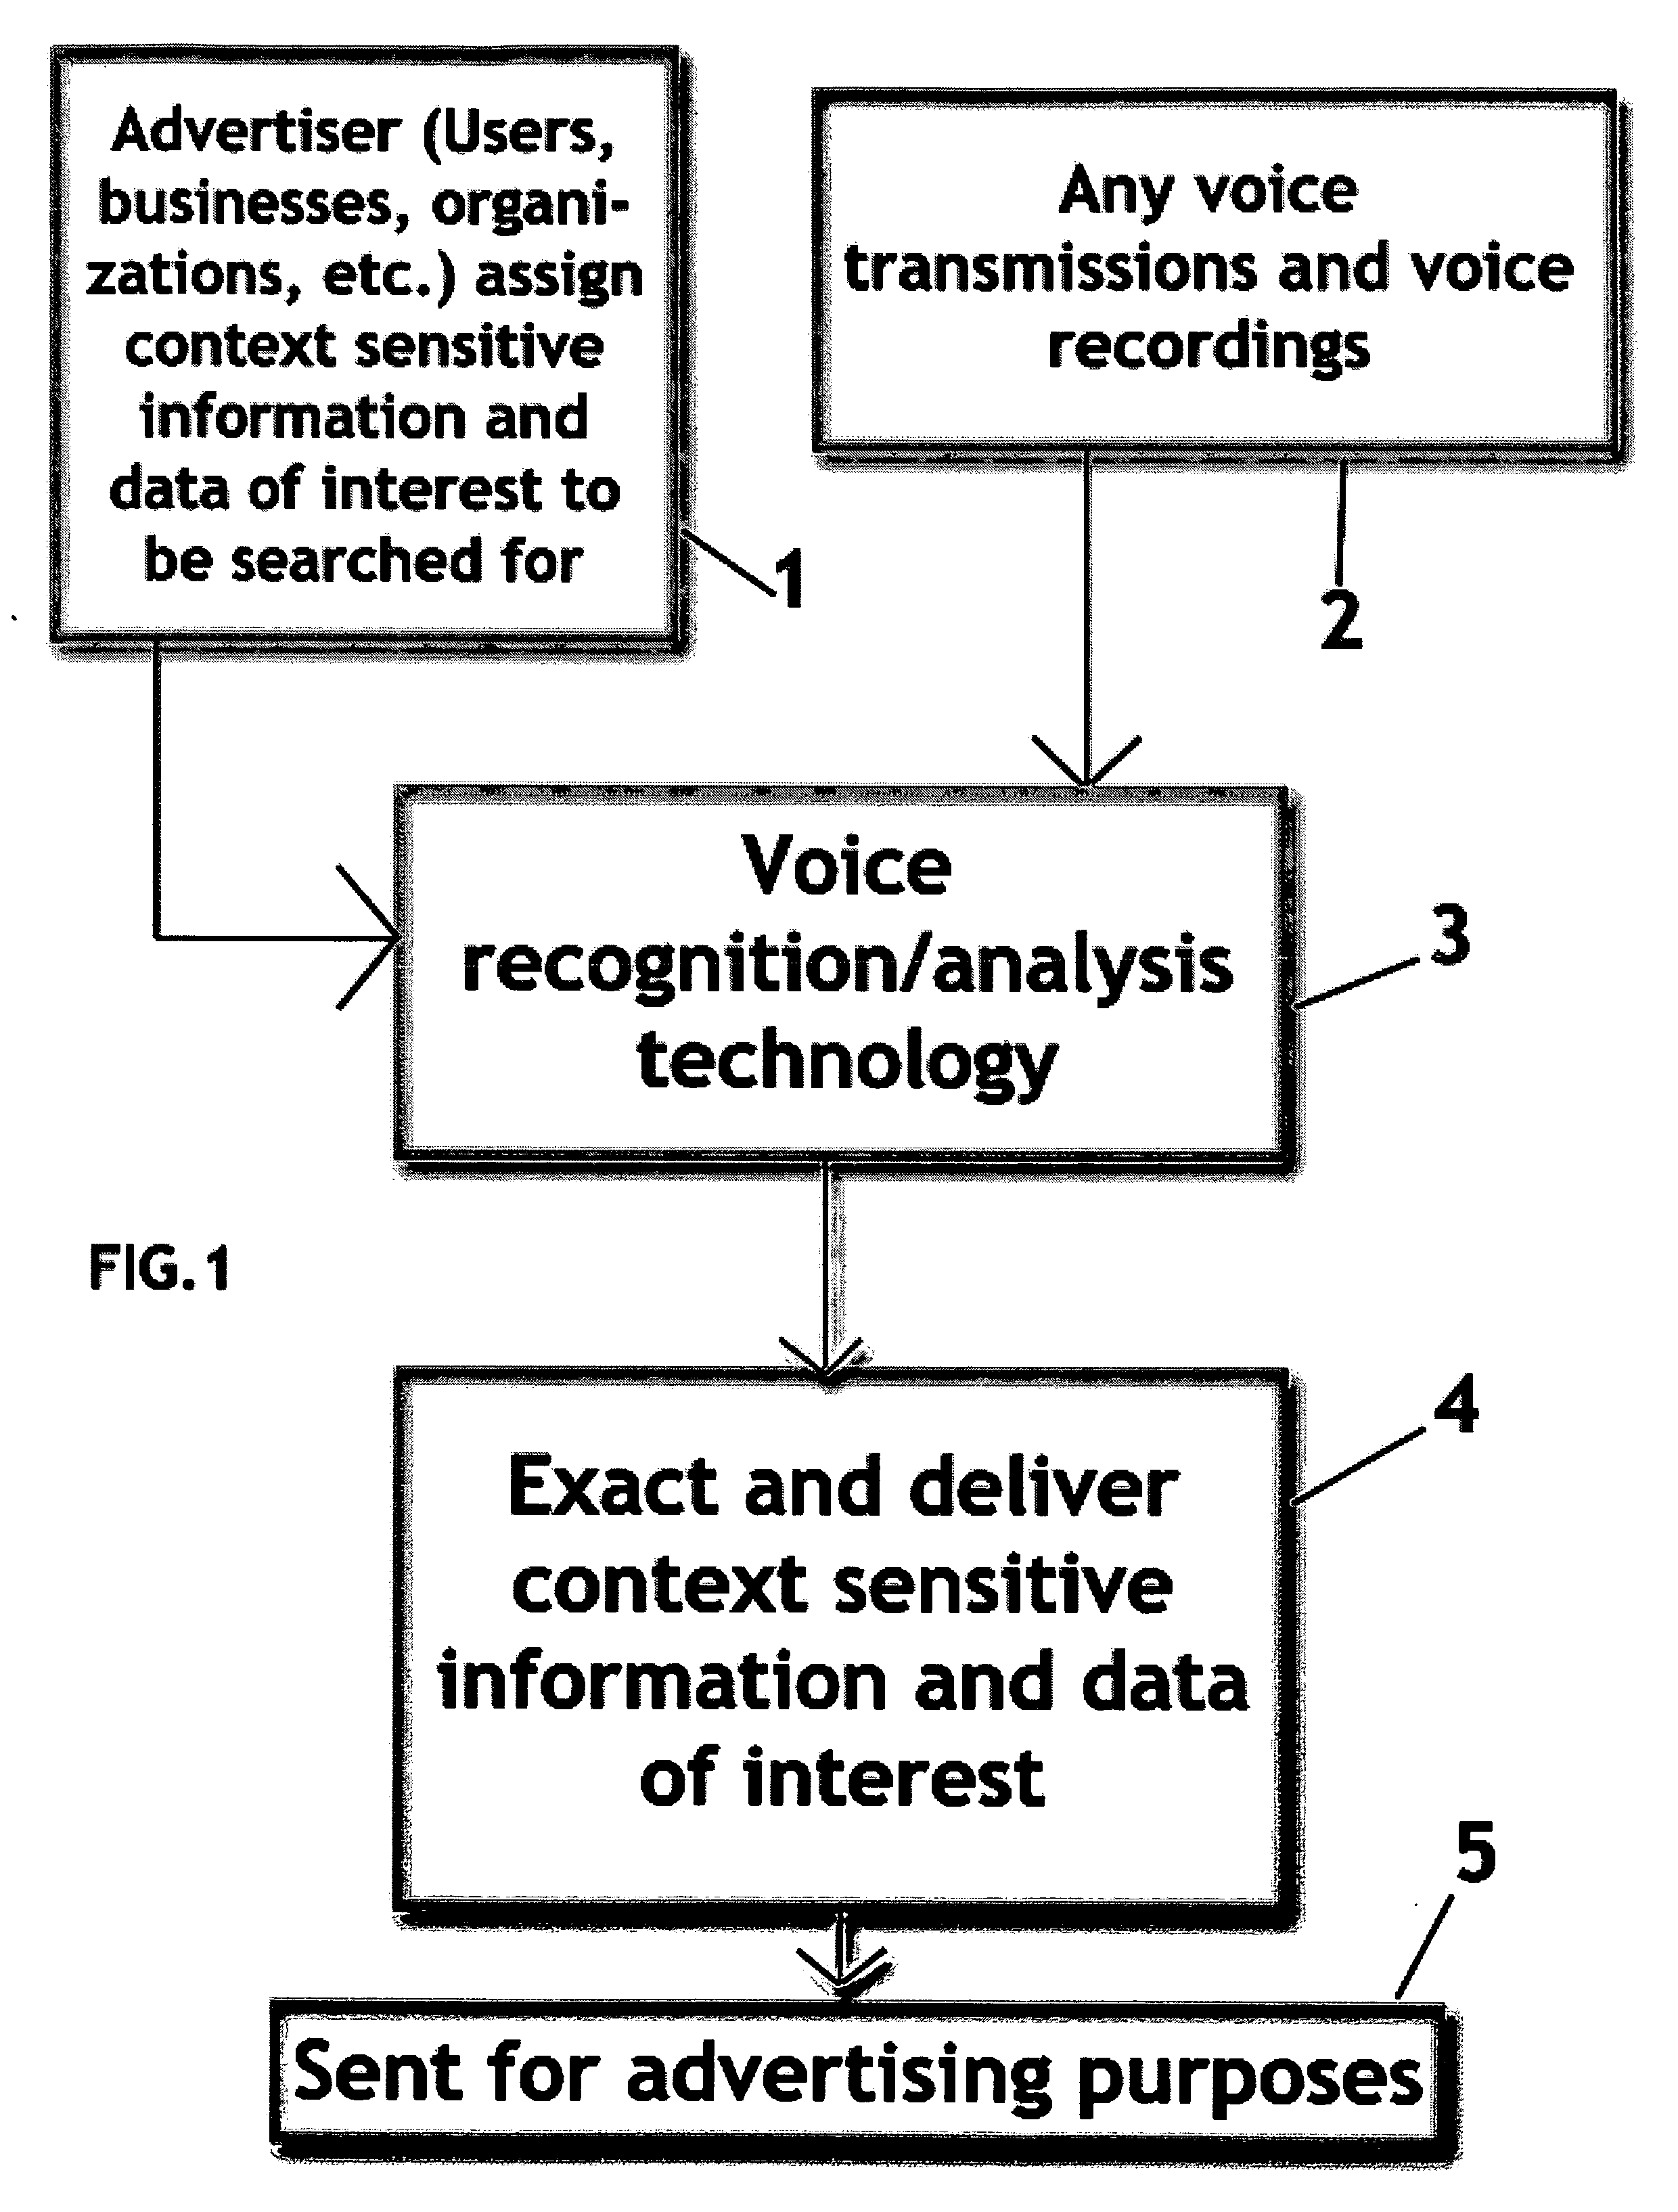 Advertising using extracted context sensitive information and data of interest from voice/audio transmissions and recordings